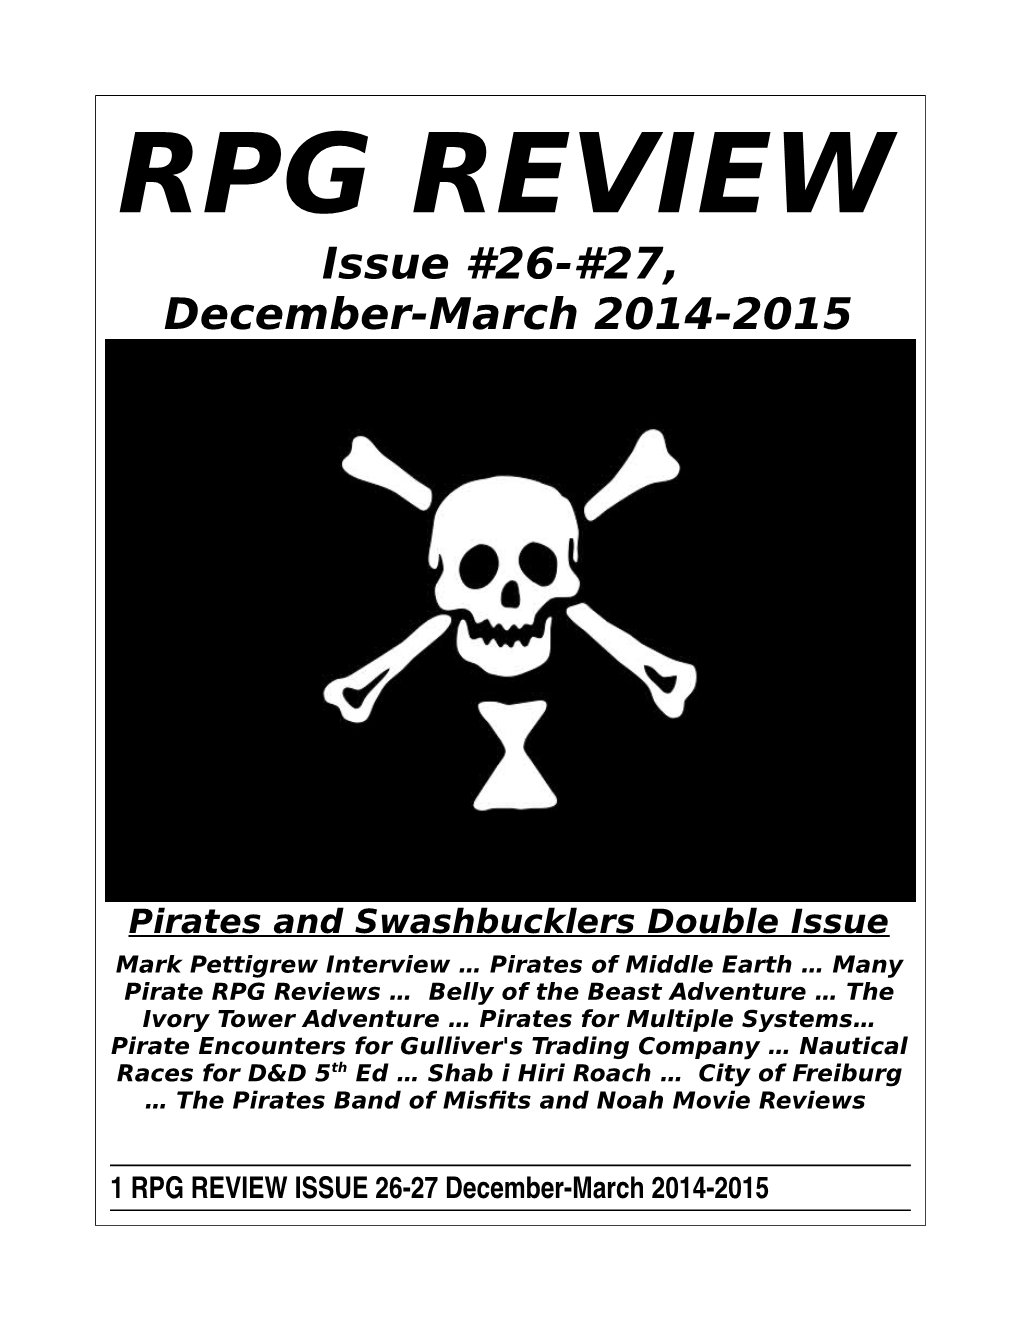 Pirates and Swashbucklers Double Issue